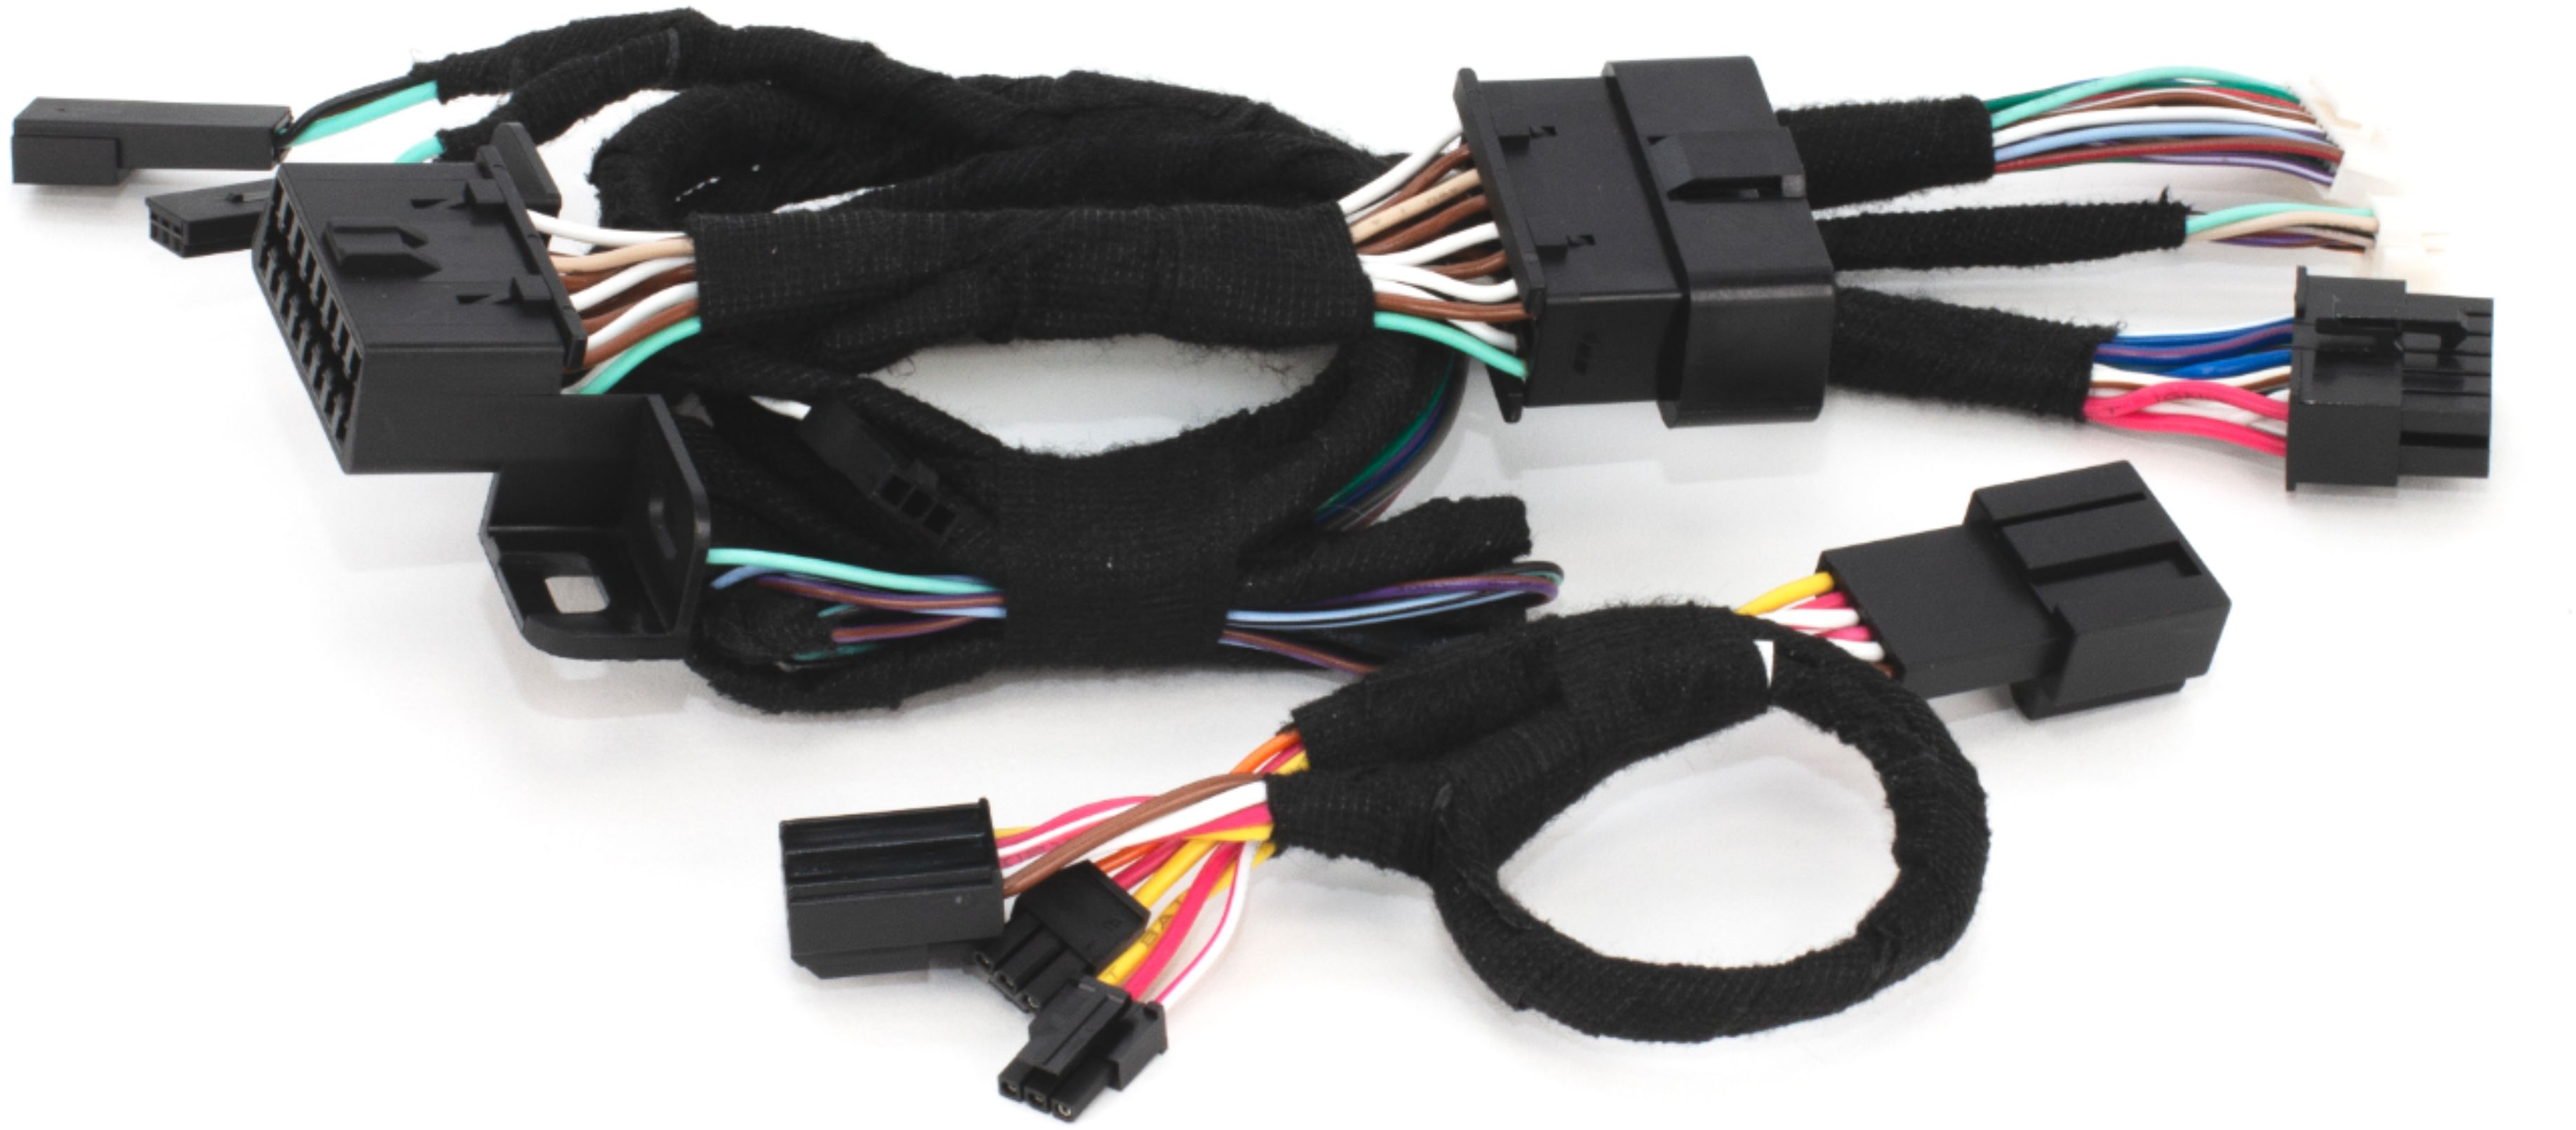 Wiring Harness Adapter For Gm Vehicles